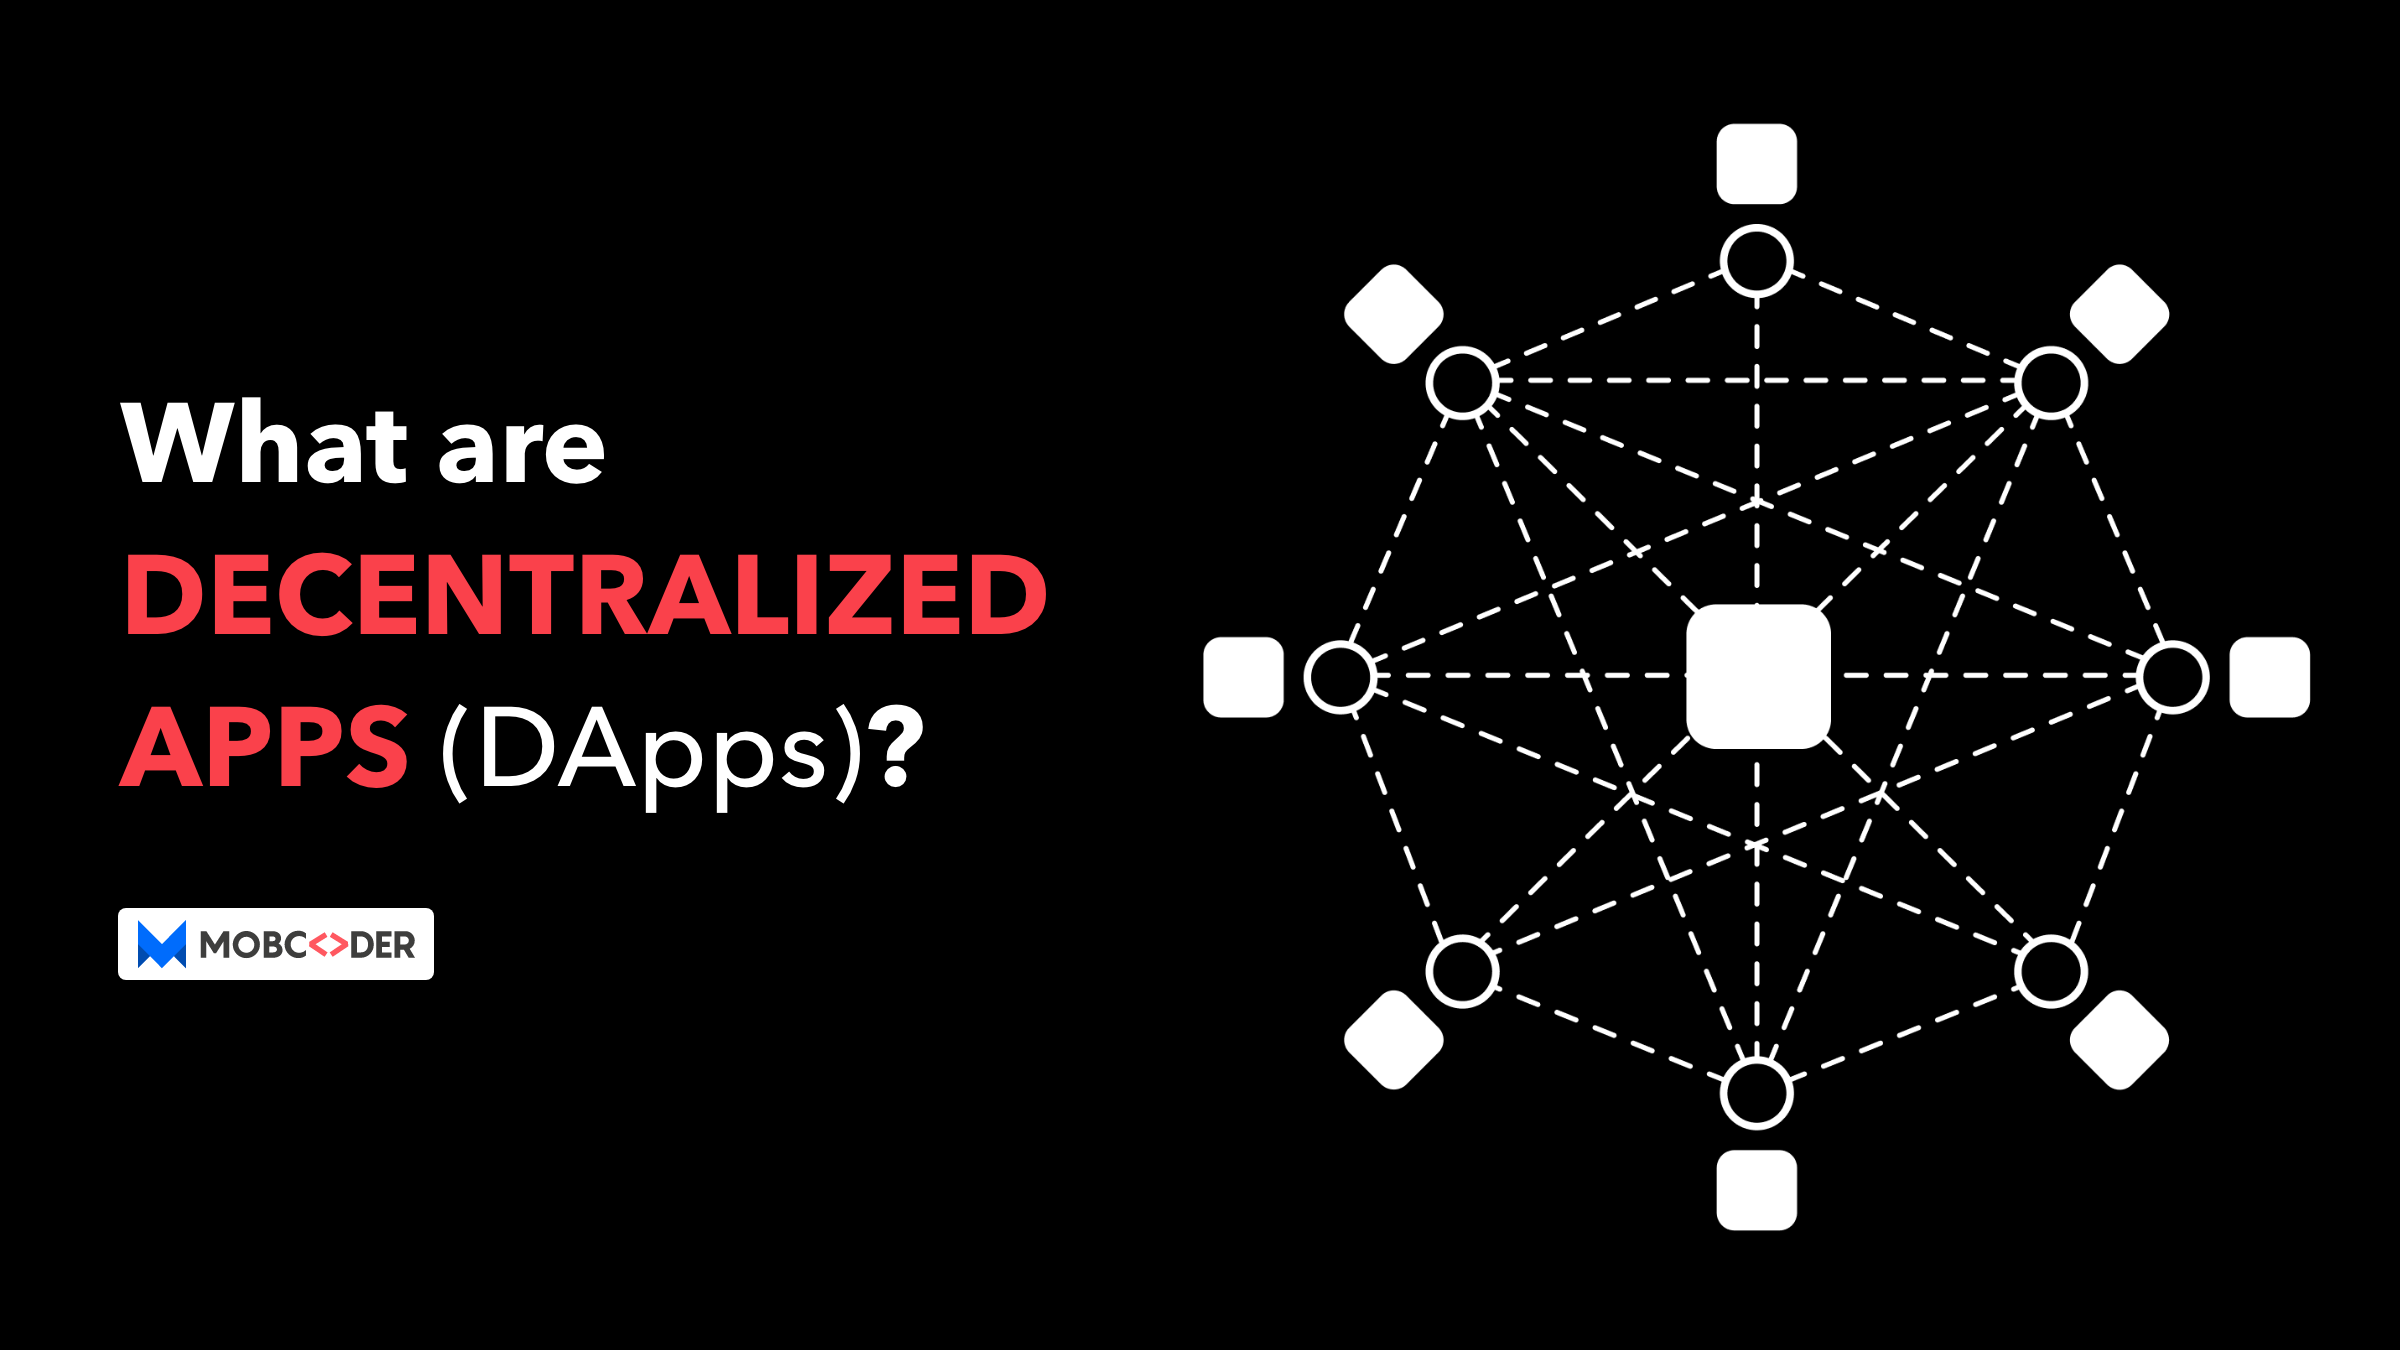 What are dApps (Decentralized Apps) in Blockchain?